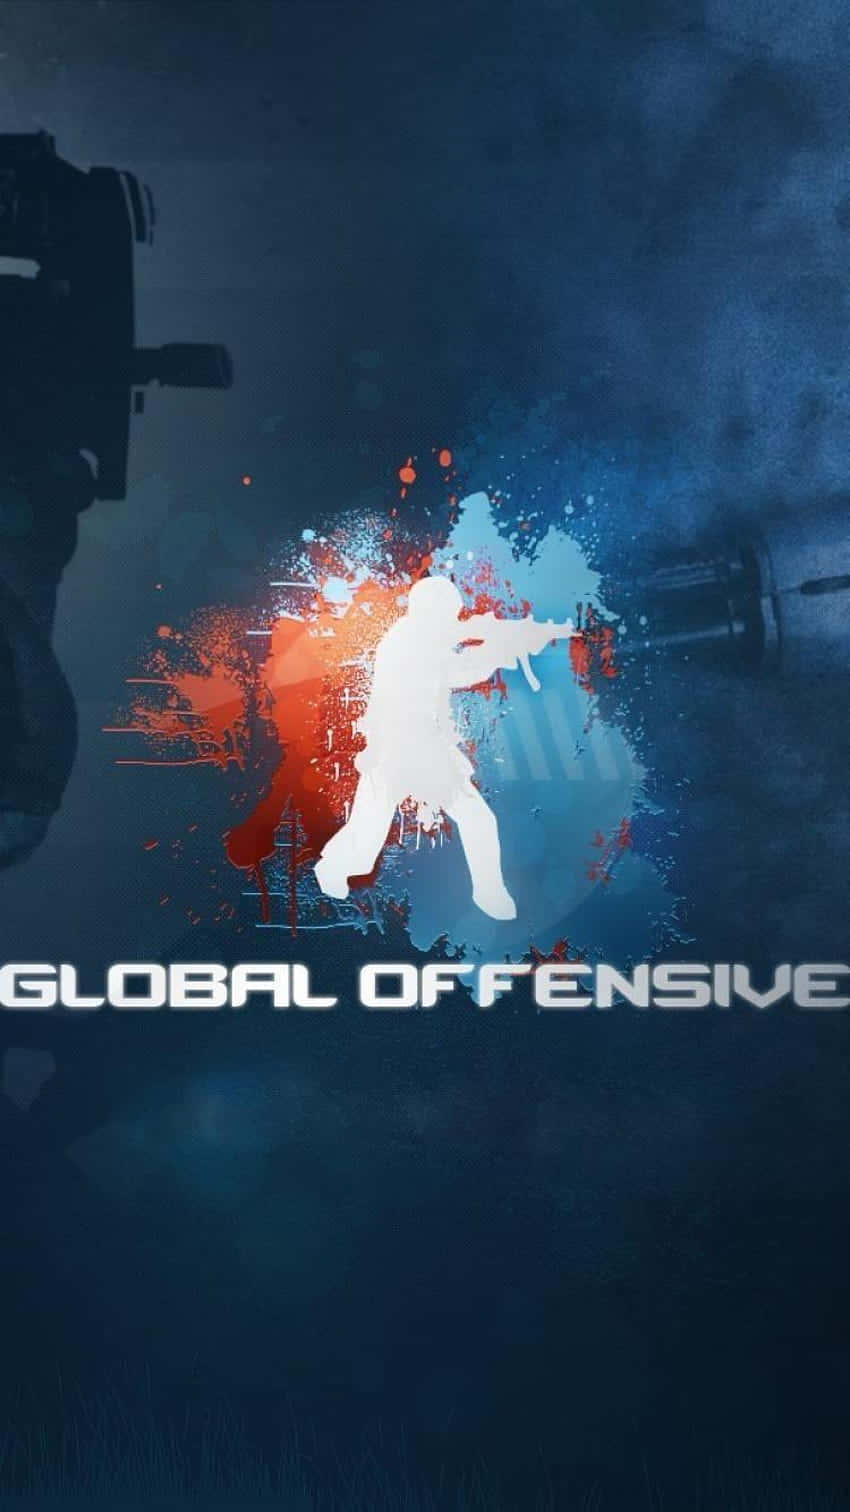 Android Counter-strike Global Offensive Game Logo Over Foggy Blue Backdrop Background